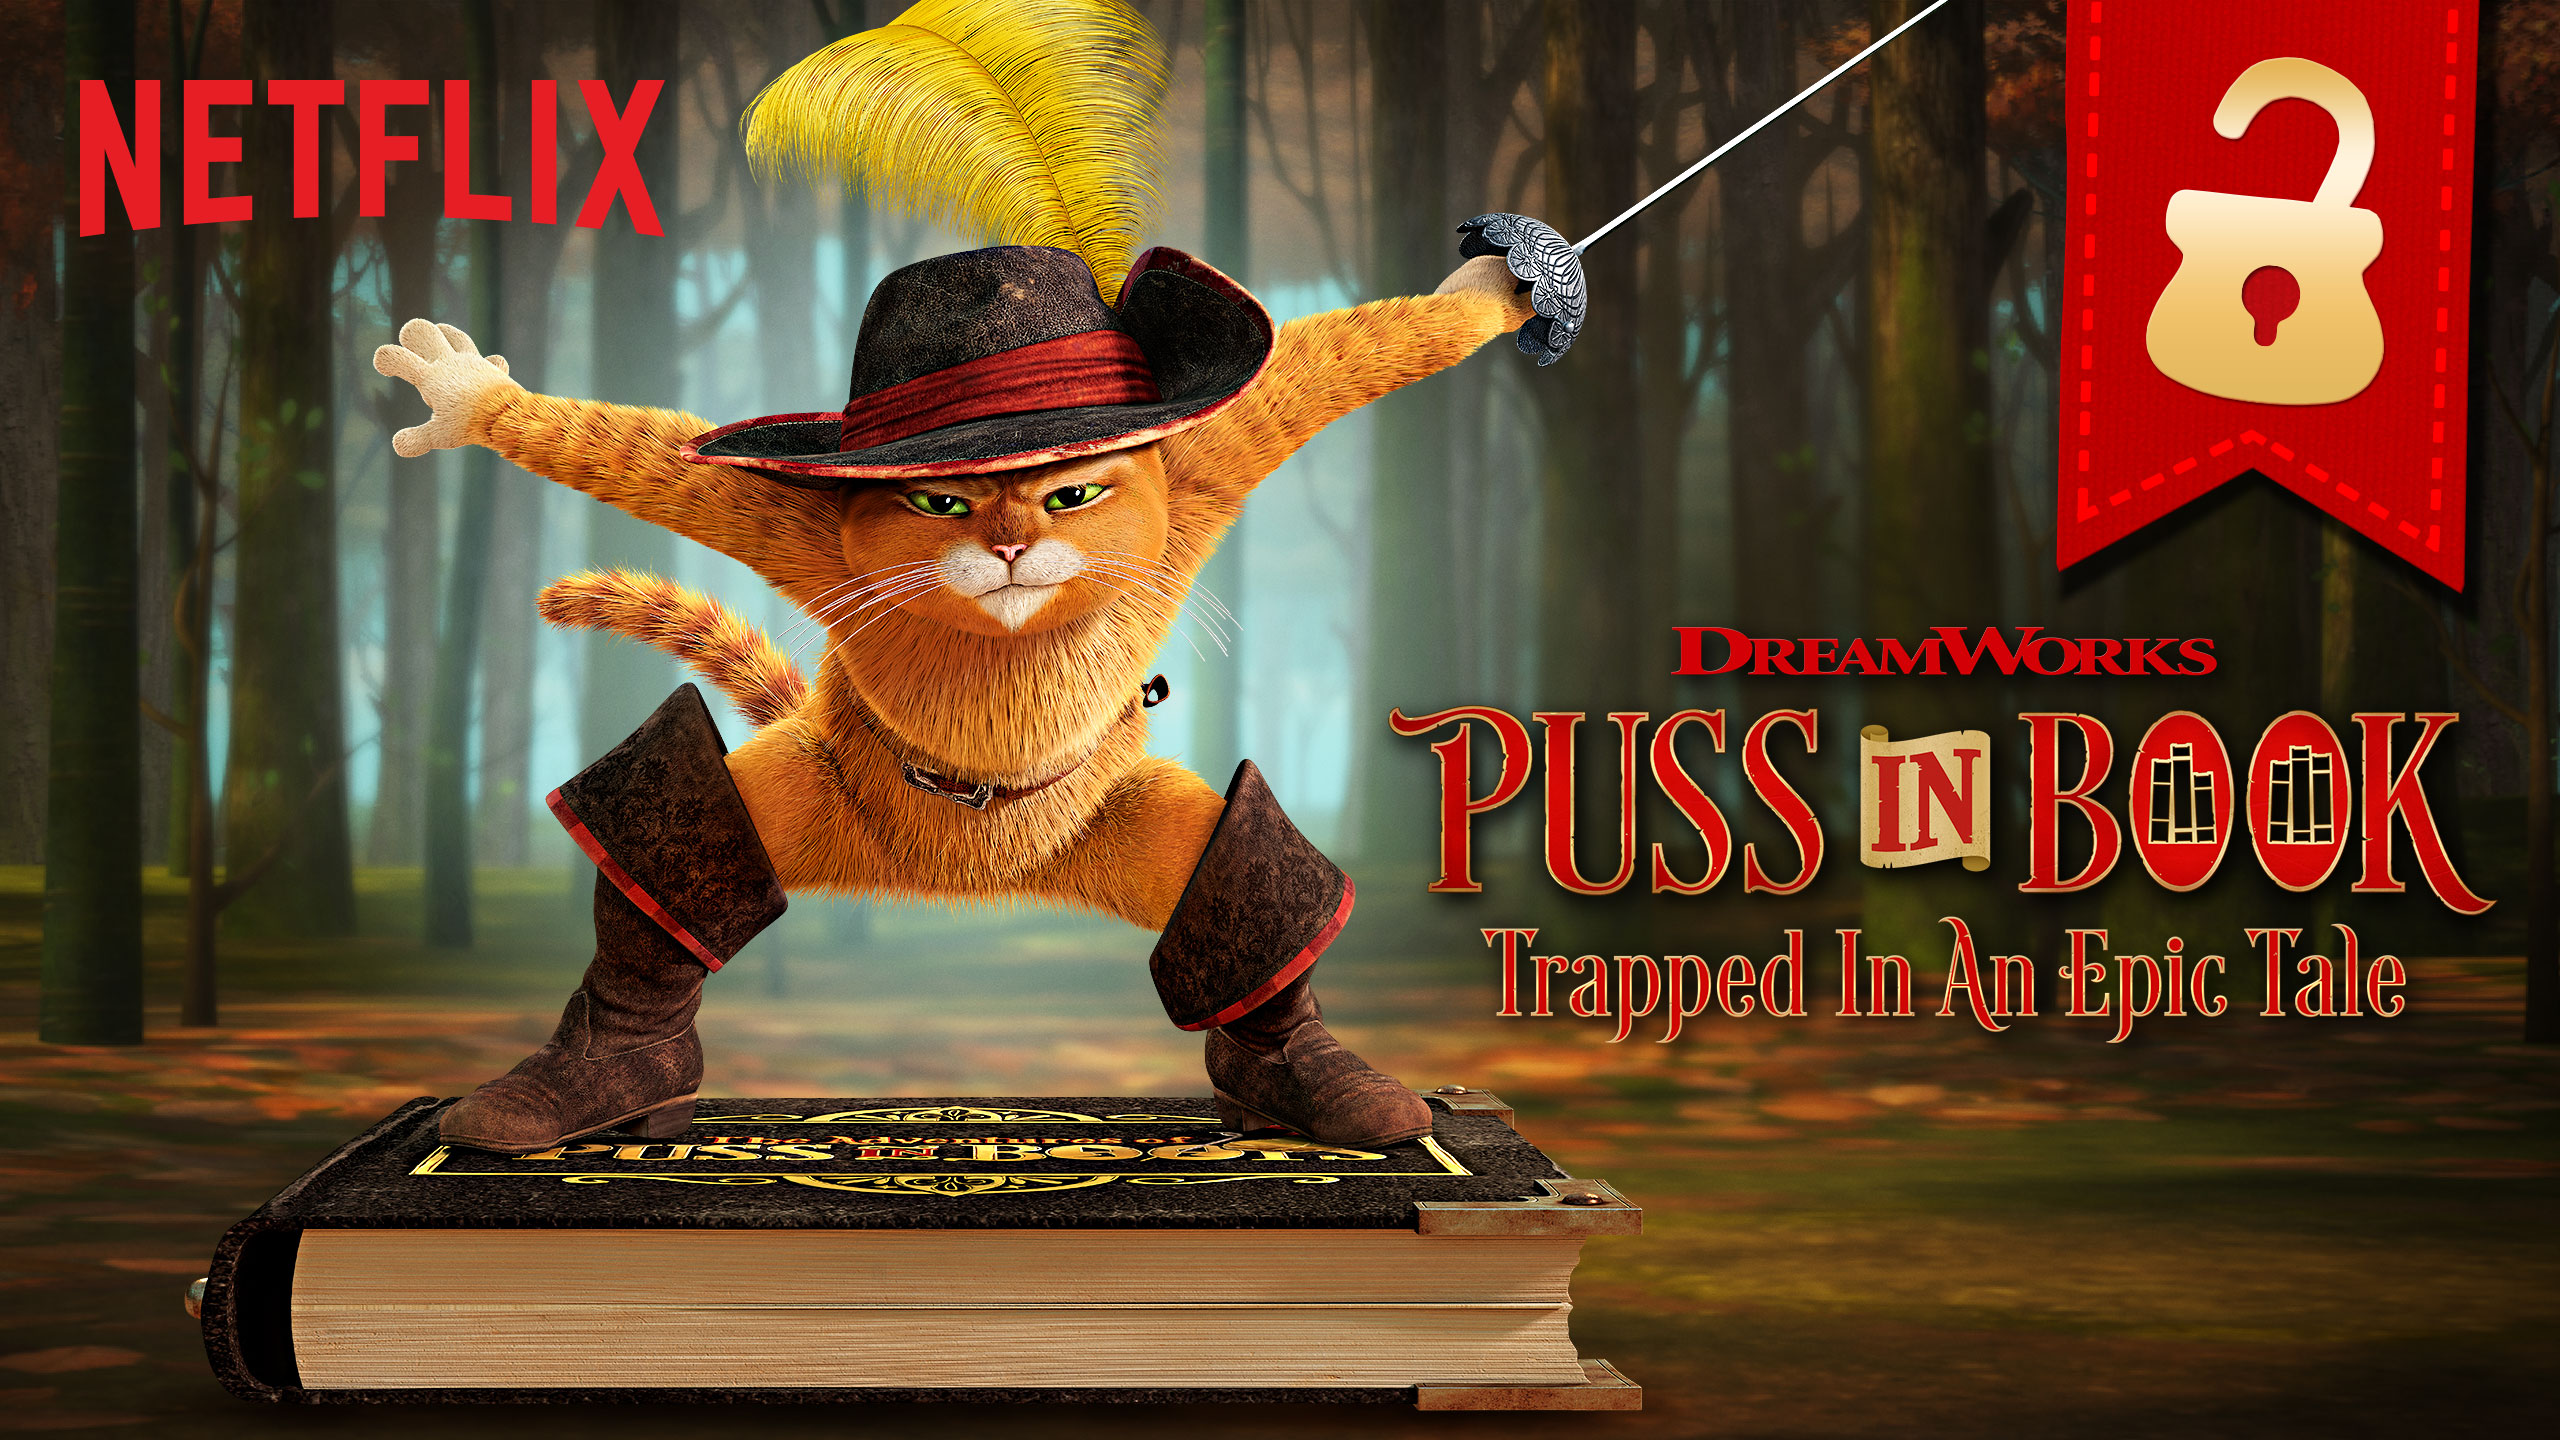 Puss In Book: Trapped In An Epic Tale, is a standalone episode of current Netflix show The Adventures Of Puss In Boots (Netflix).